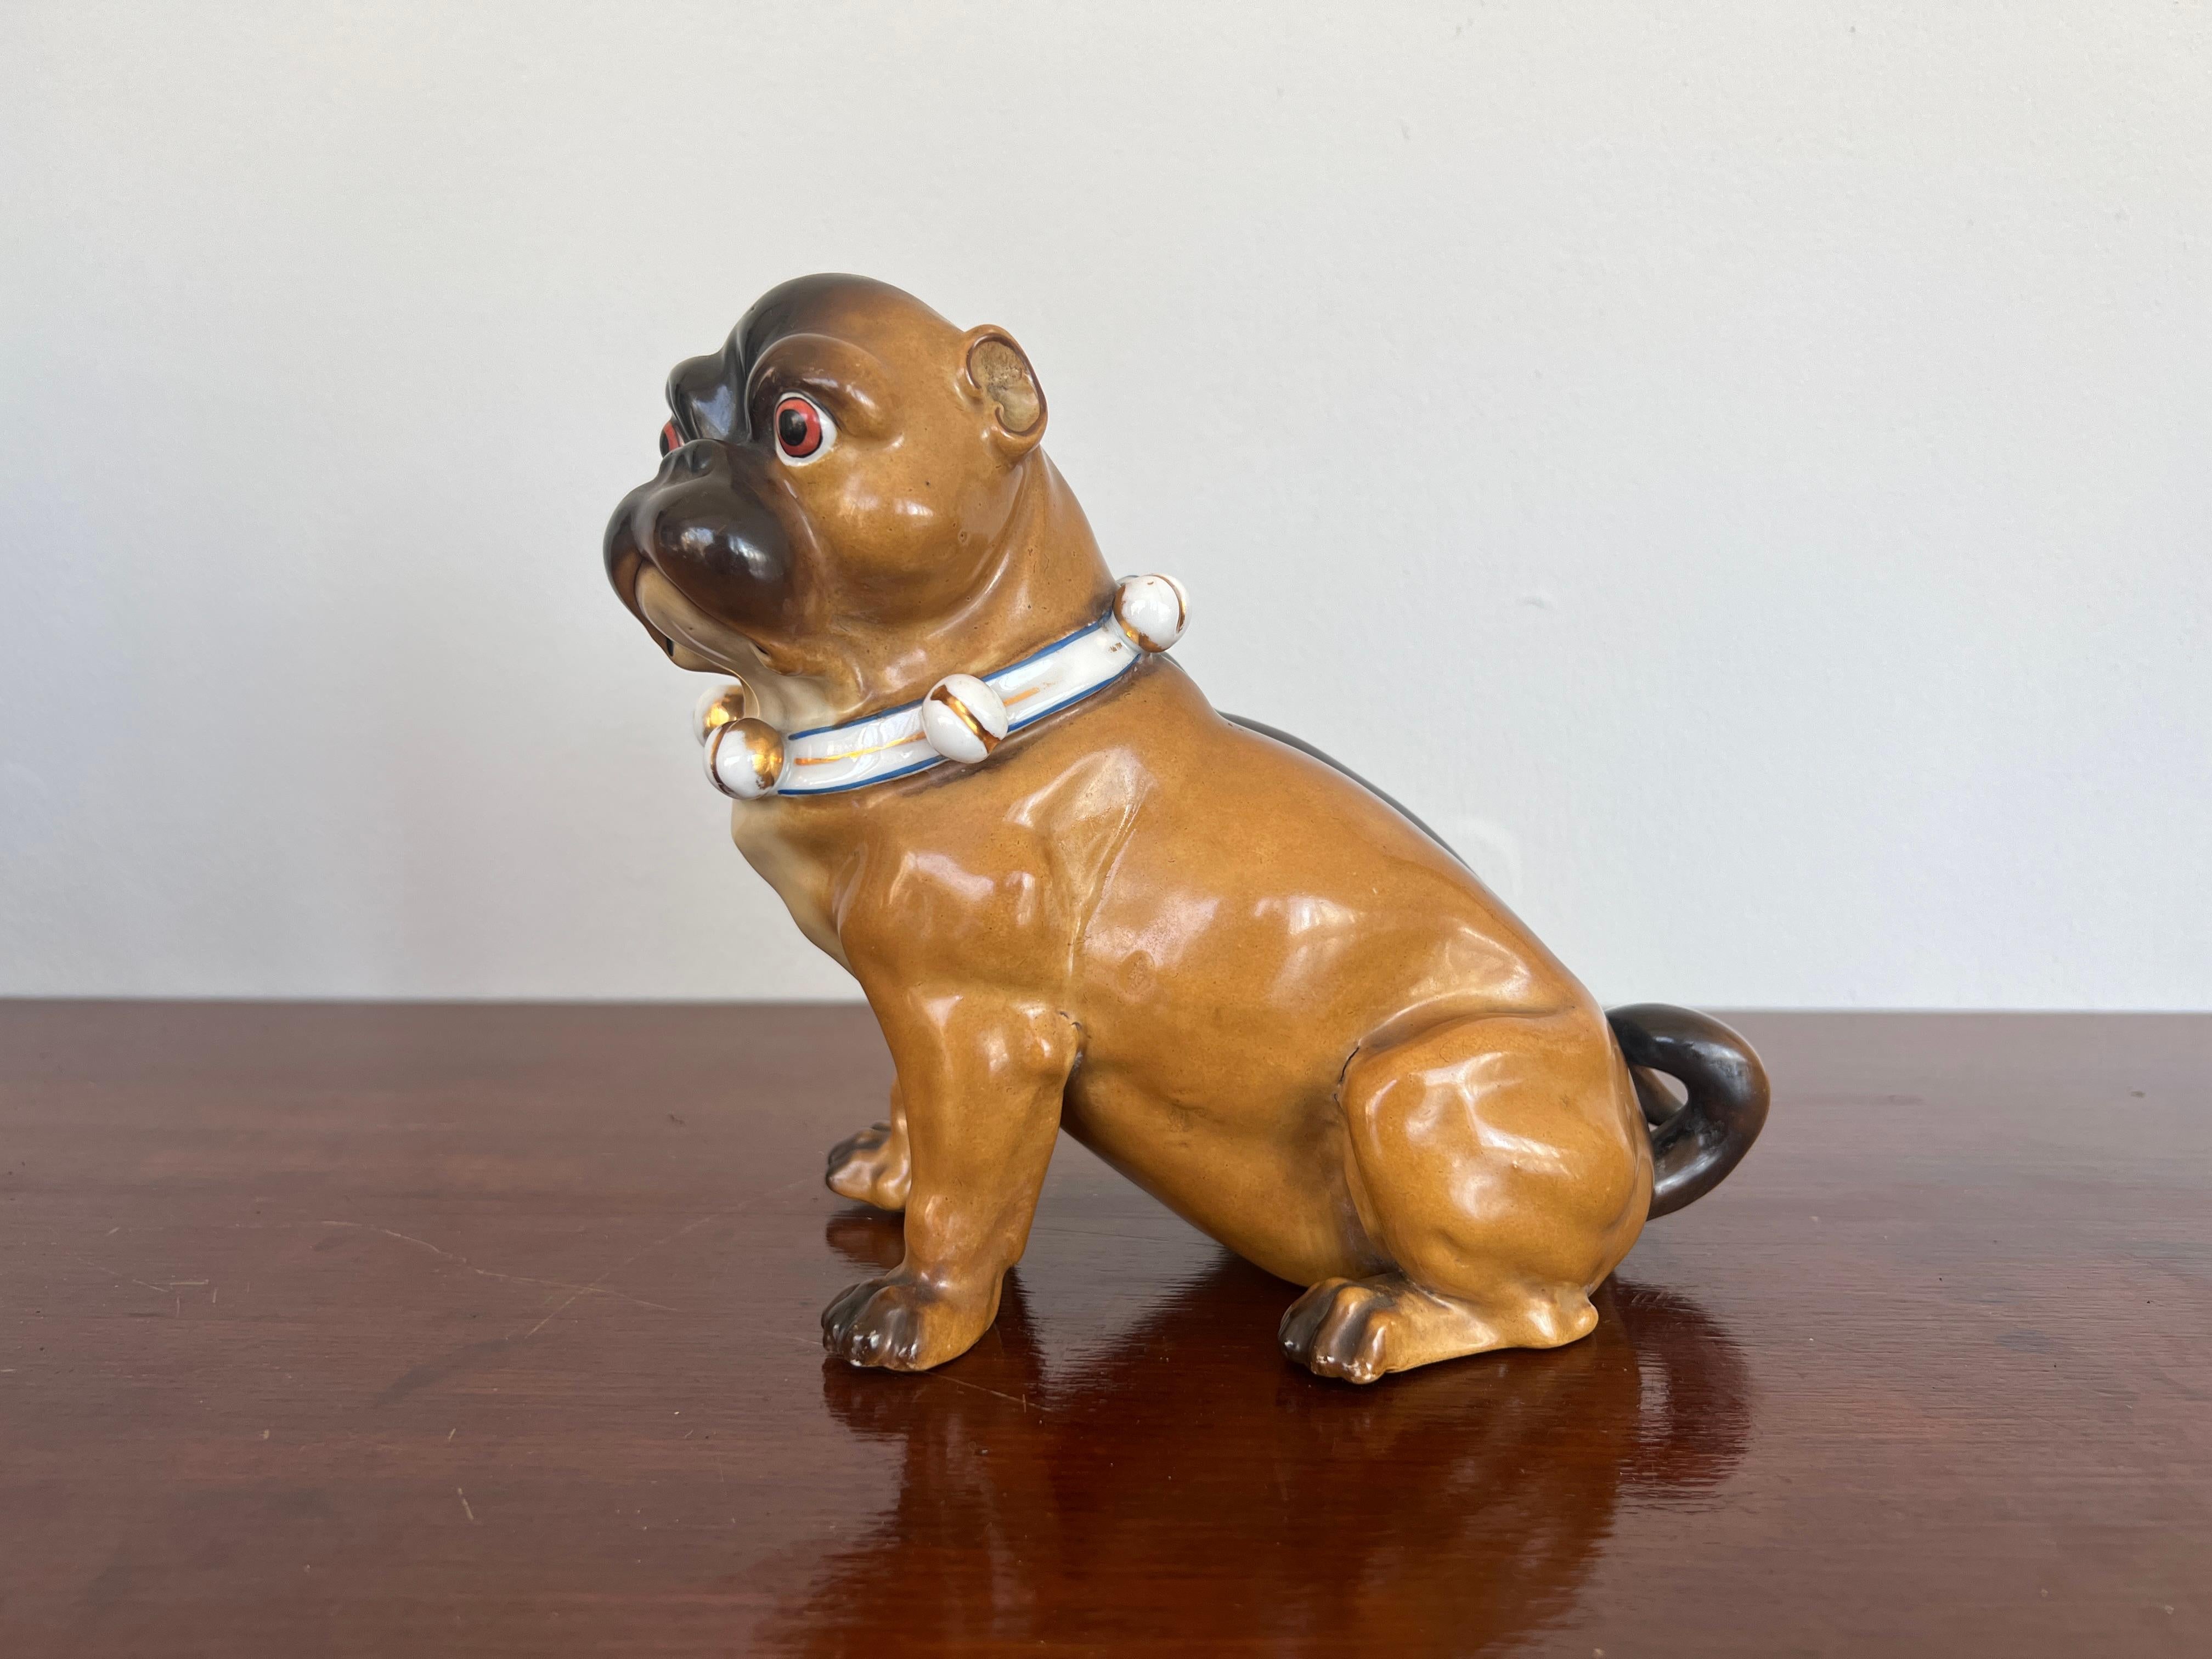 German, late 19th century.

An antique German porcelain model of a seated pug.